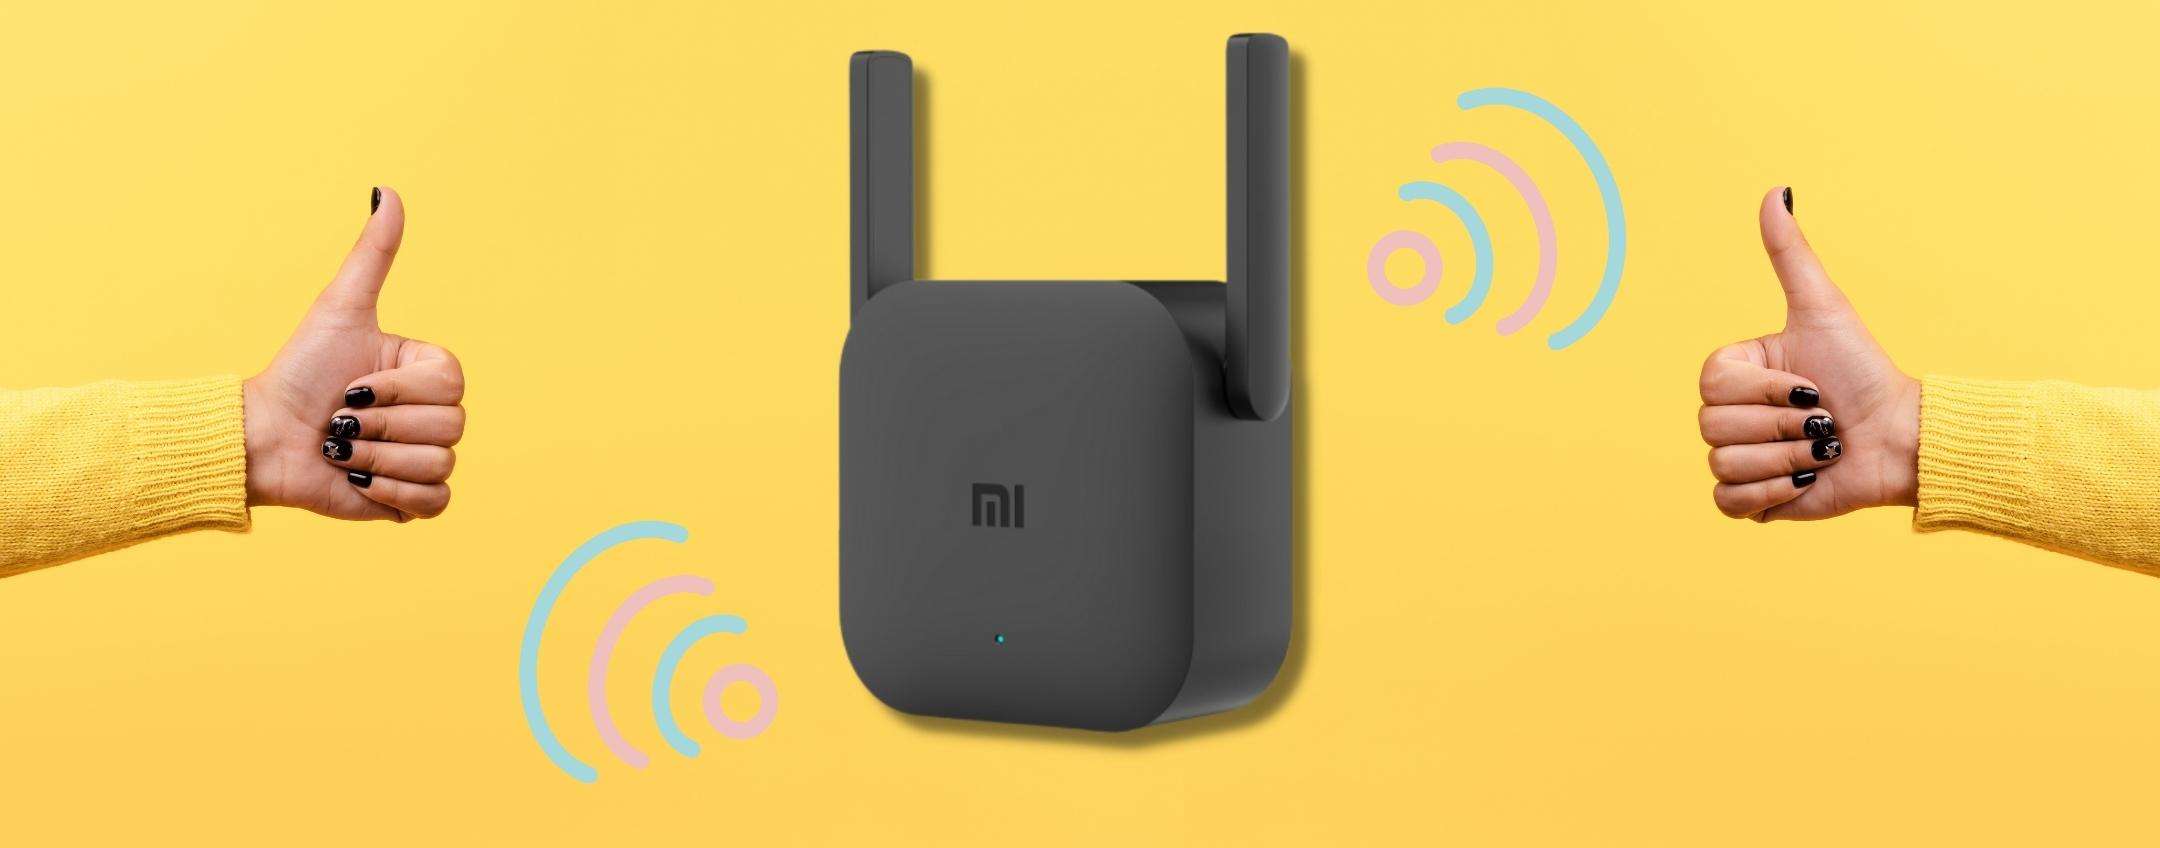 WiFi around the house is flying with this Xiaomi gadget (€13)